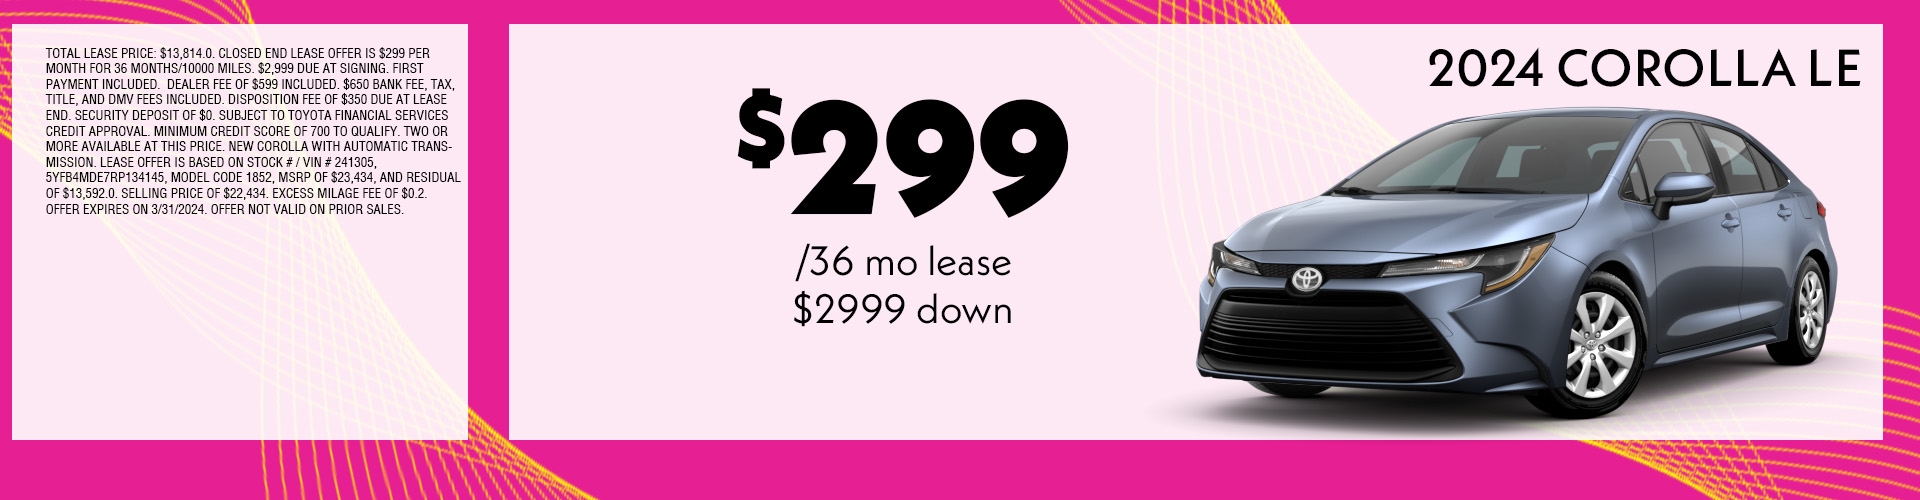 corolla lease special